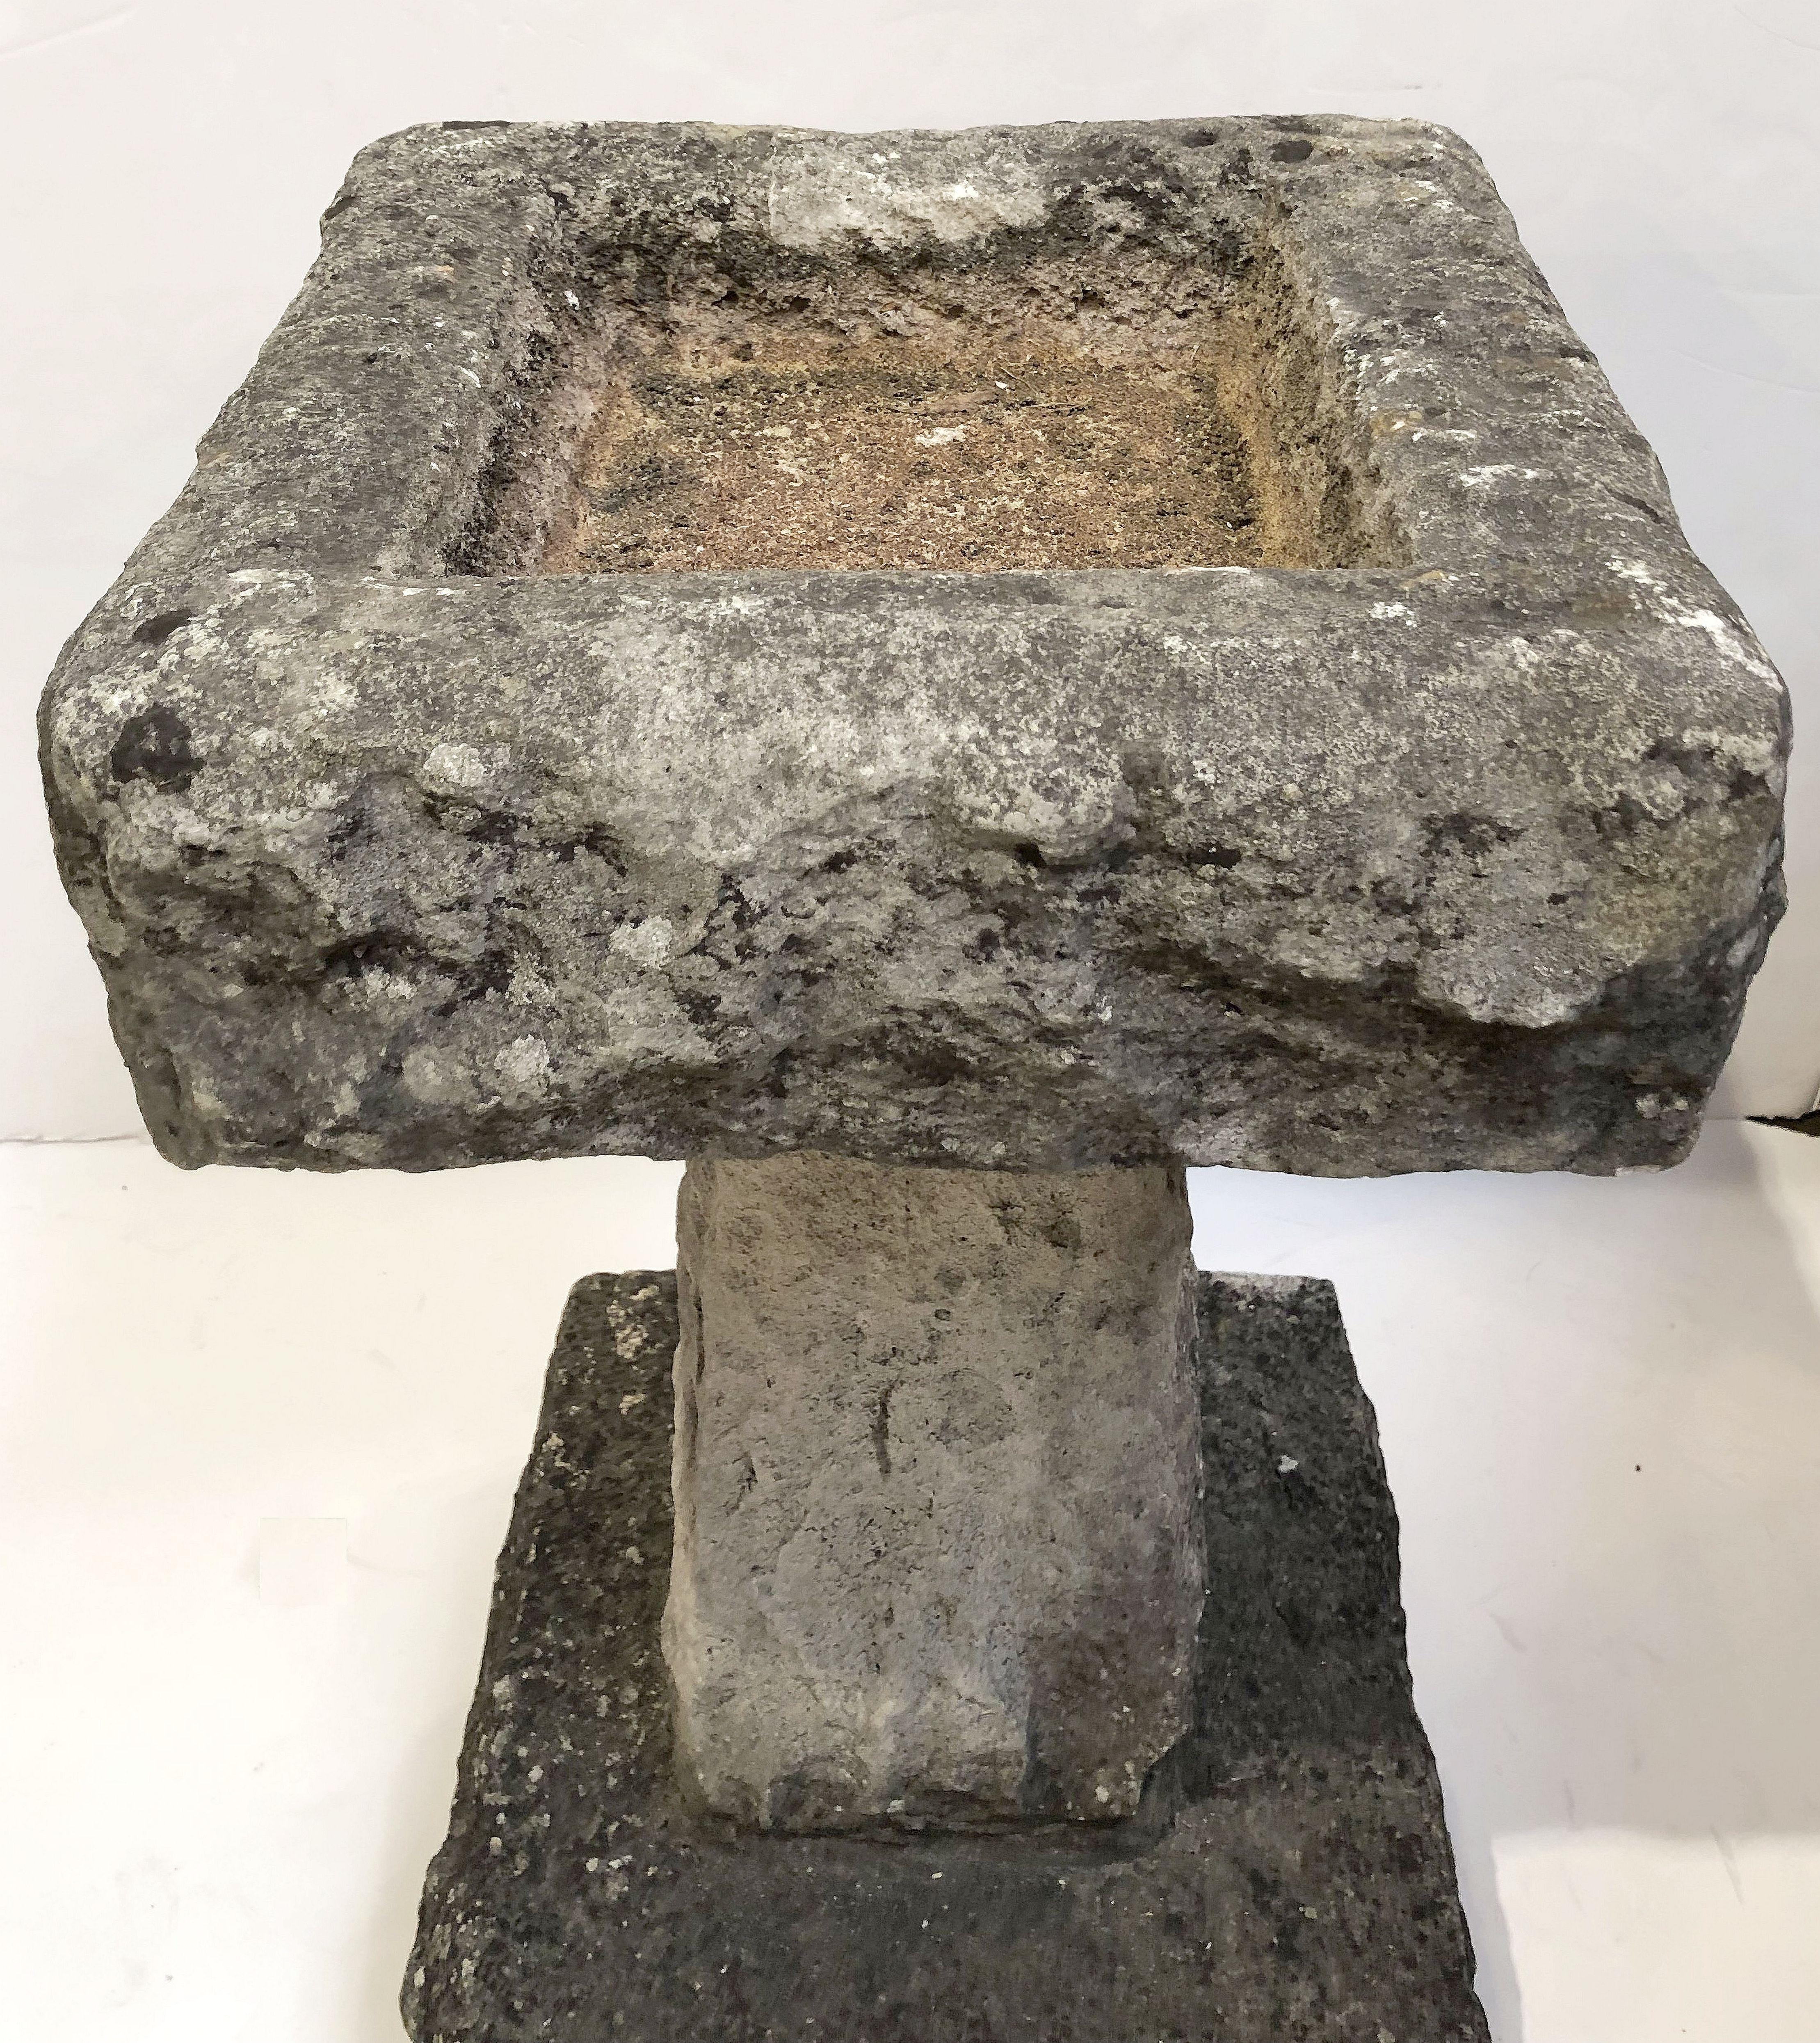 A fine English garden bird bath of carved stone, featuring a square top with recessed area for water, set upon a tapering square column and raised plinth base.

Dimensions: H 24 inches x W 12 1/2 inches x D 12 inches.